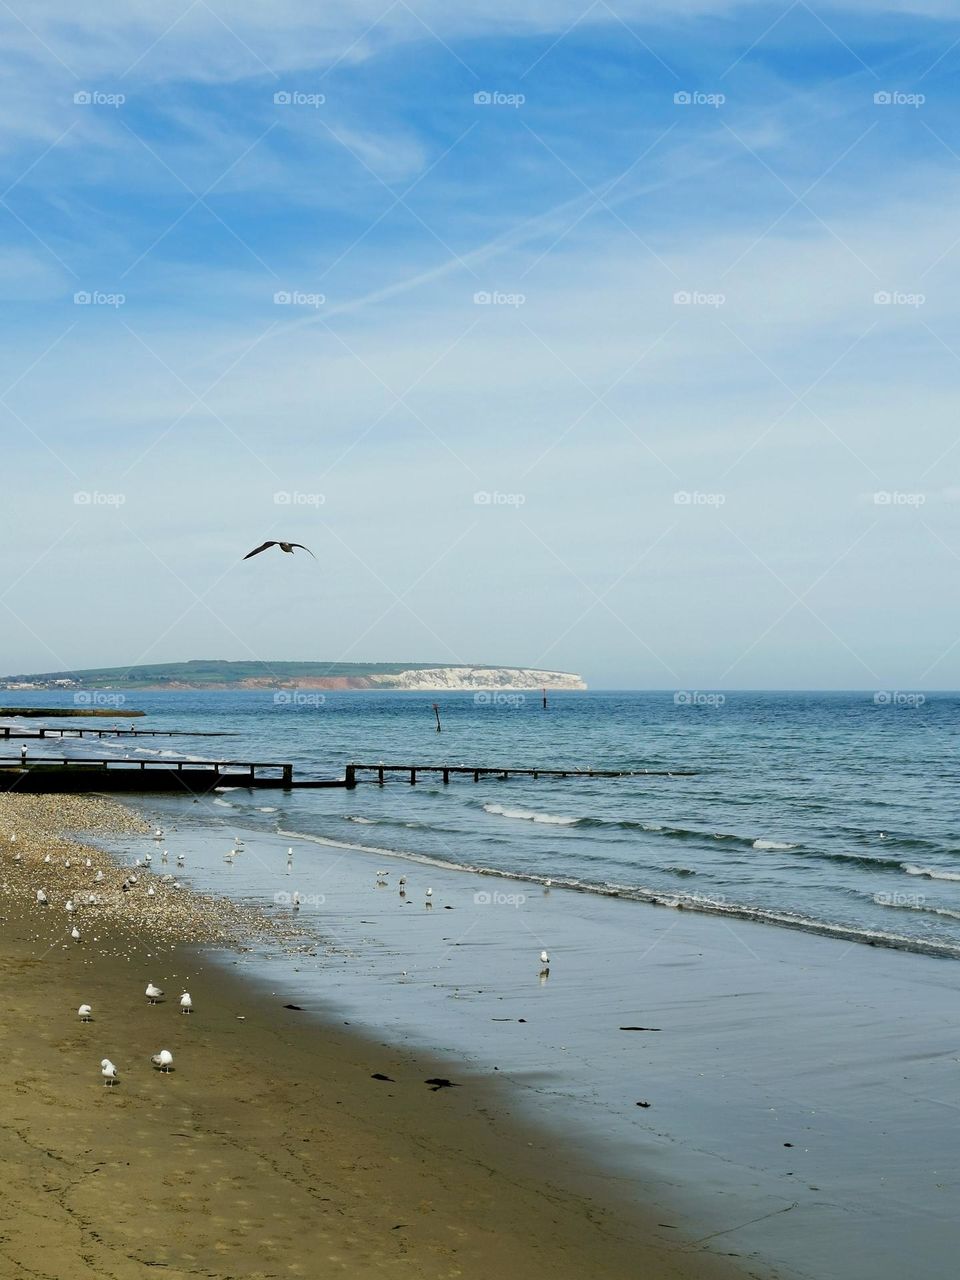 Sunny spring day. Sea shore. Seagulls on the shore and in the sky, beautiful weather, beautiful landscape. Blue sky, blue sea and white seagulls on the sand. England, Isle of Wight.